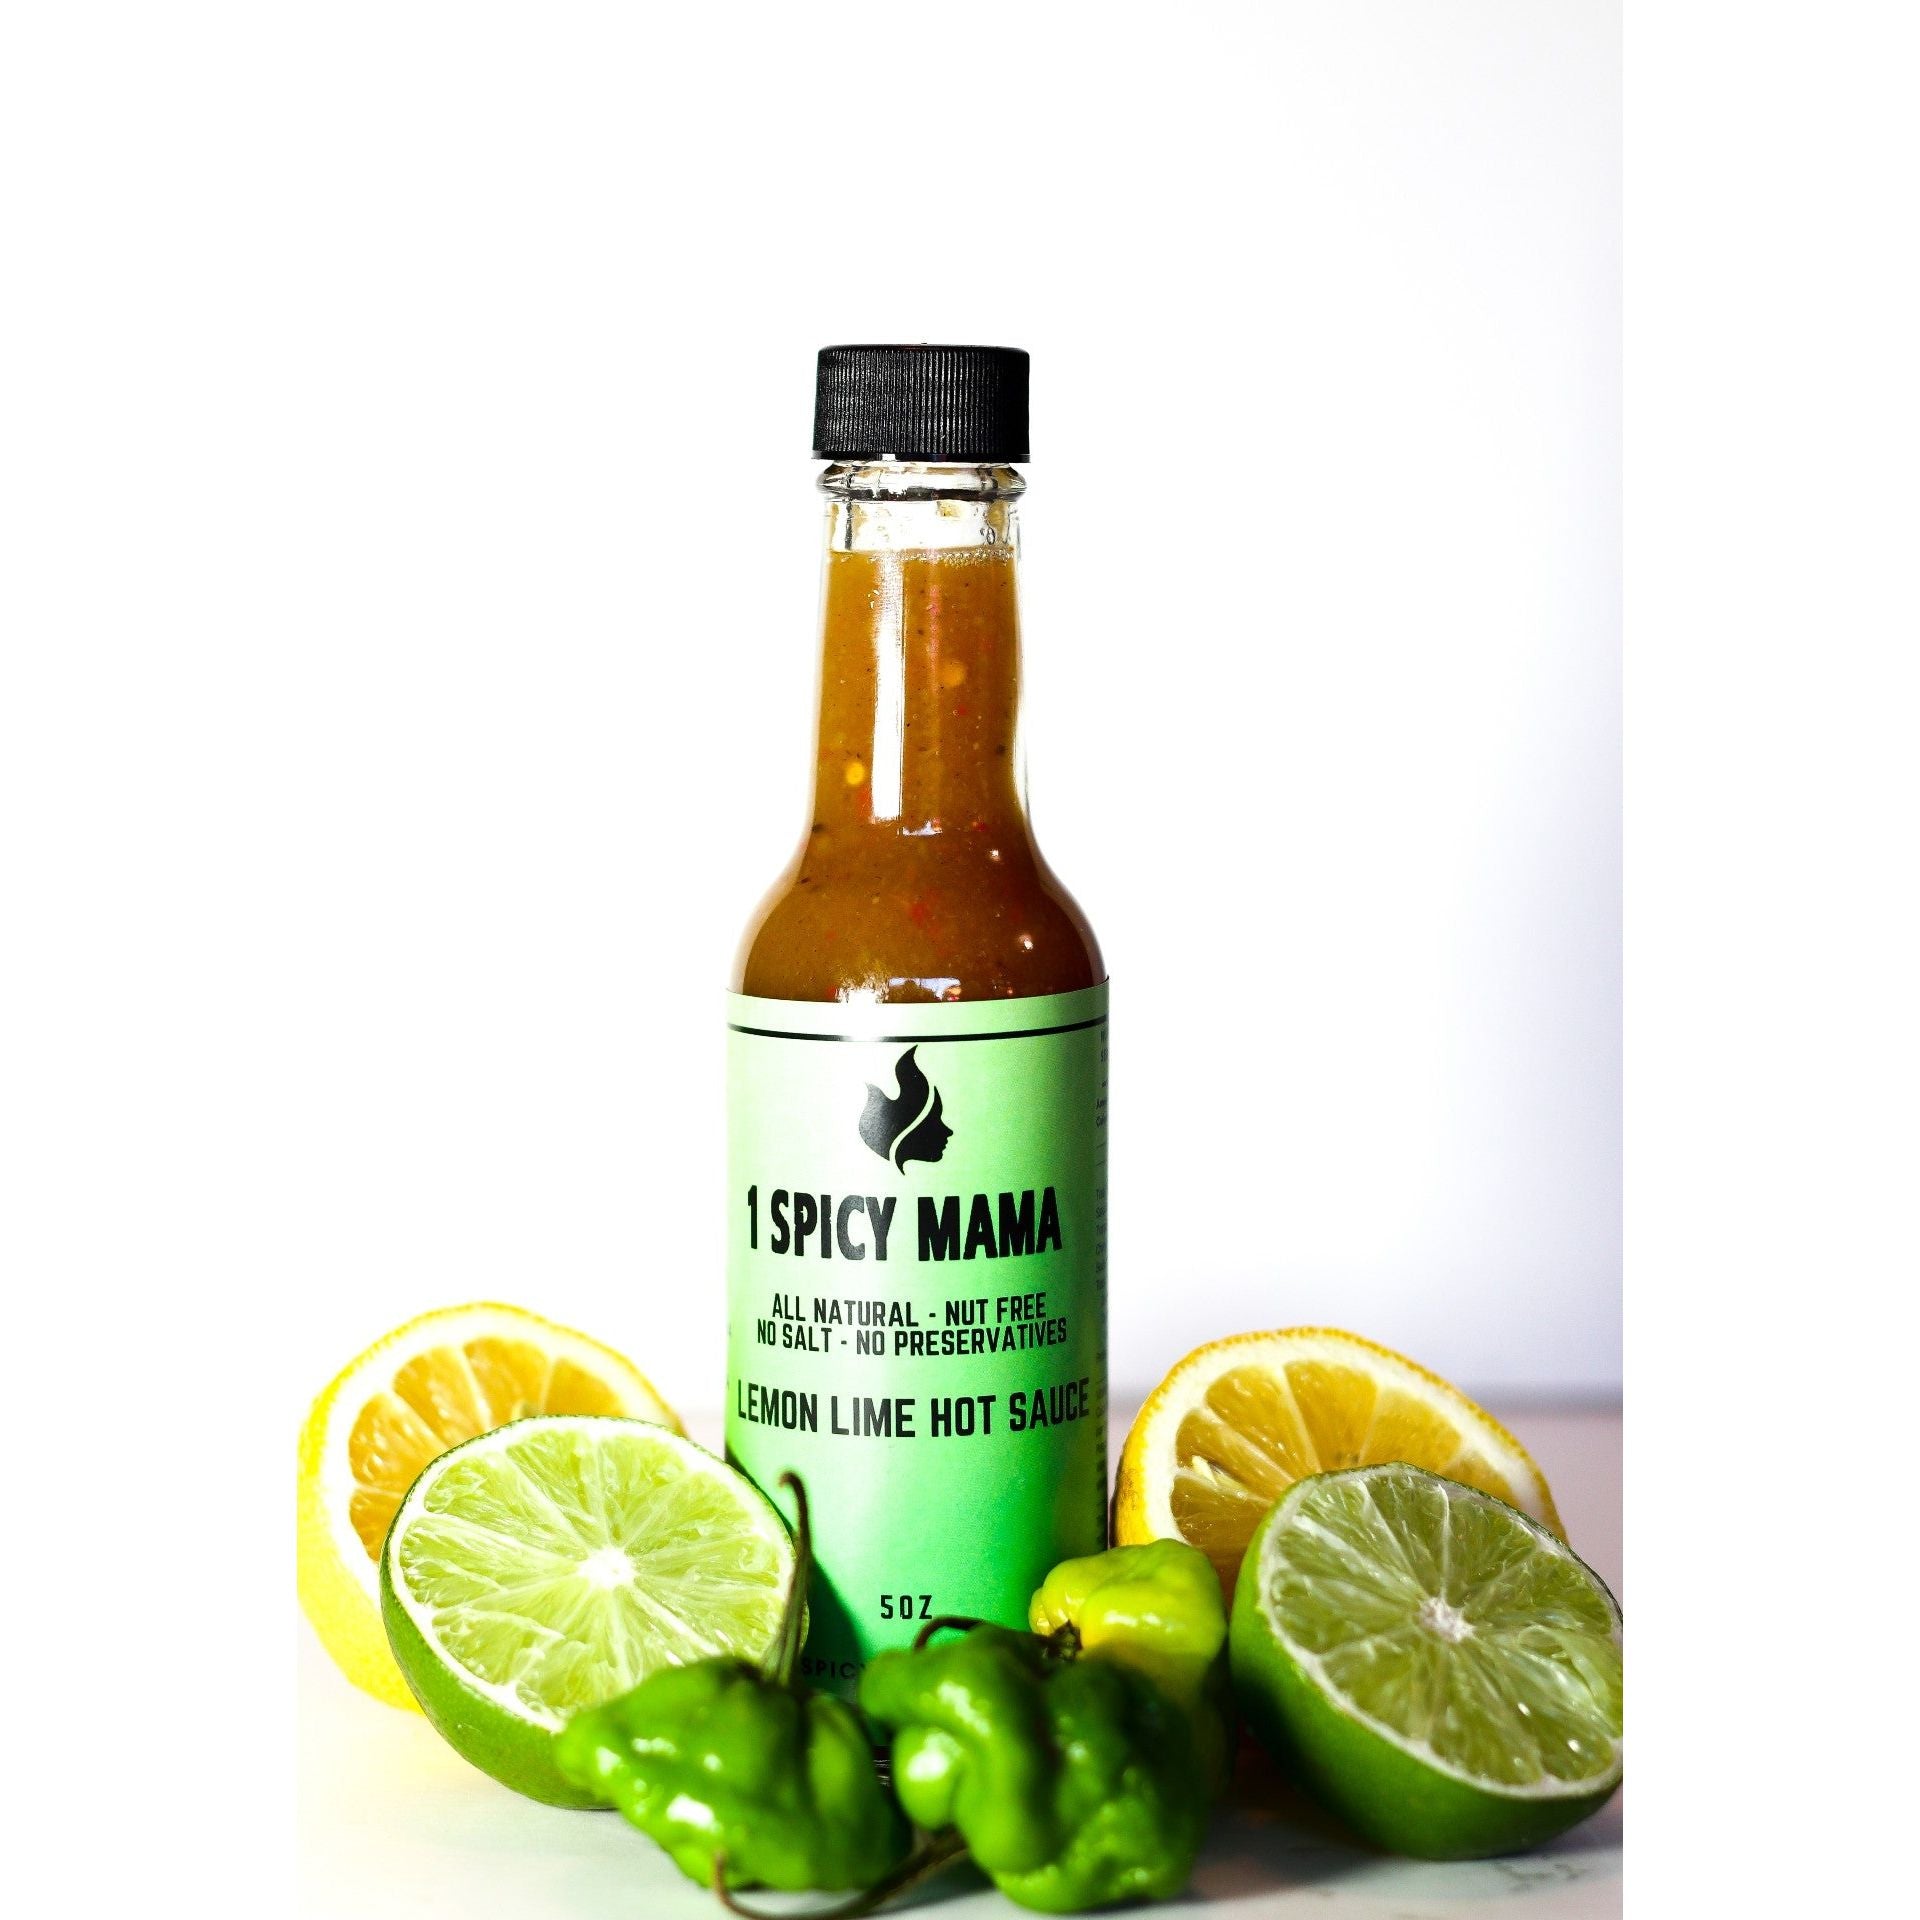 All natural gourmet sauces – 1 spicy mama